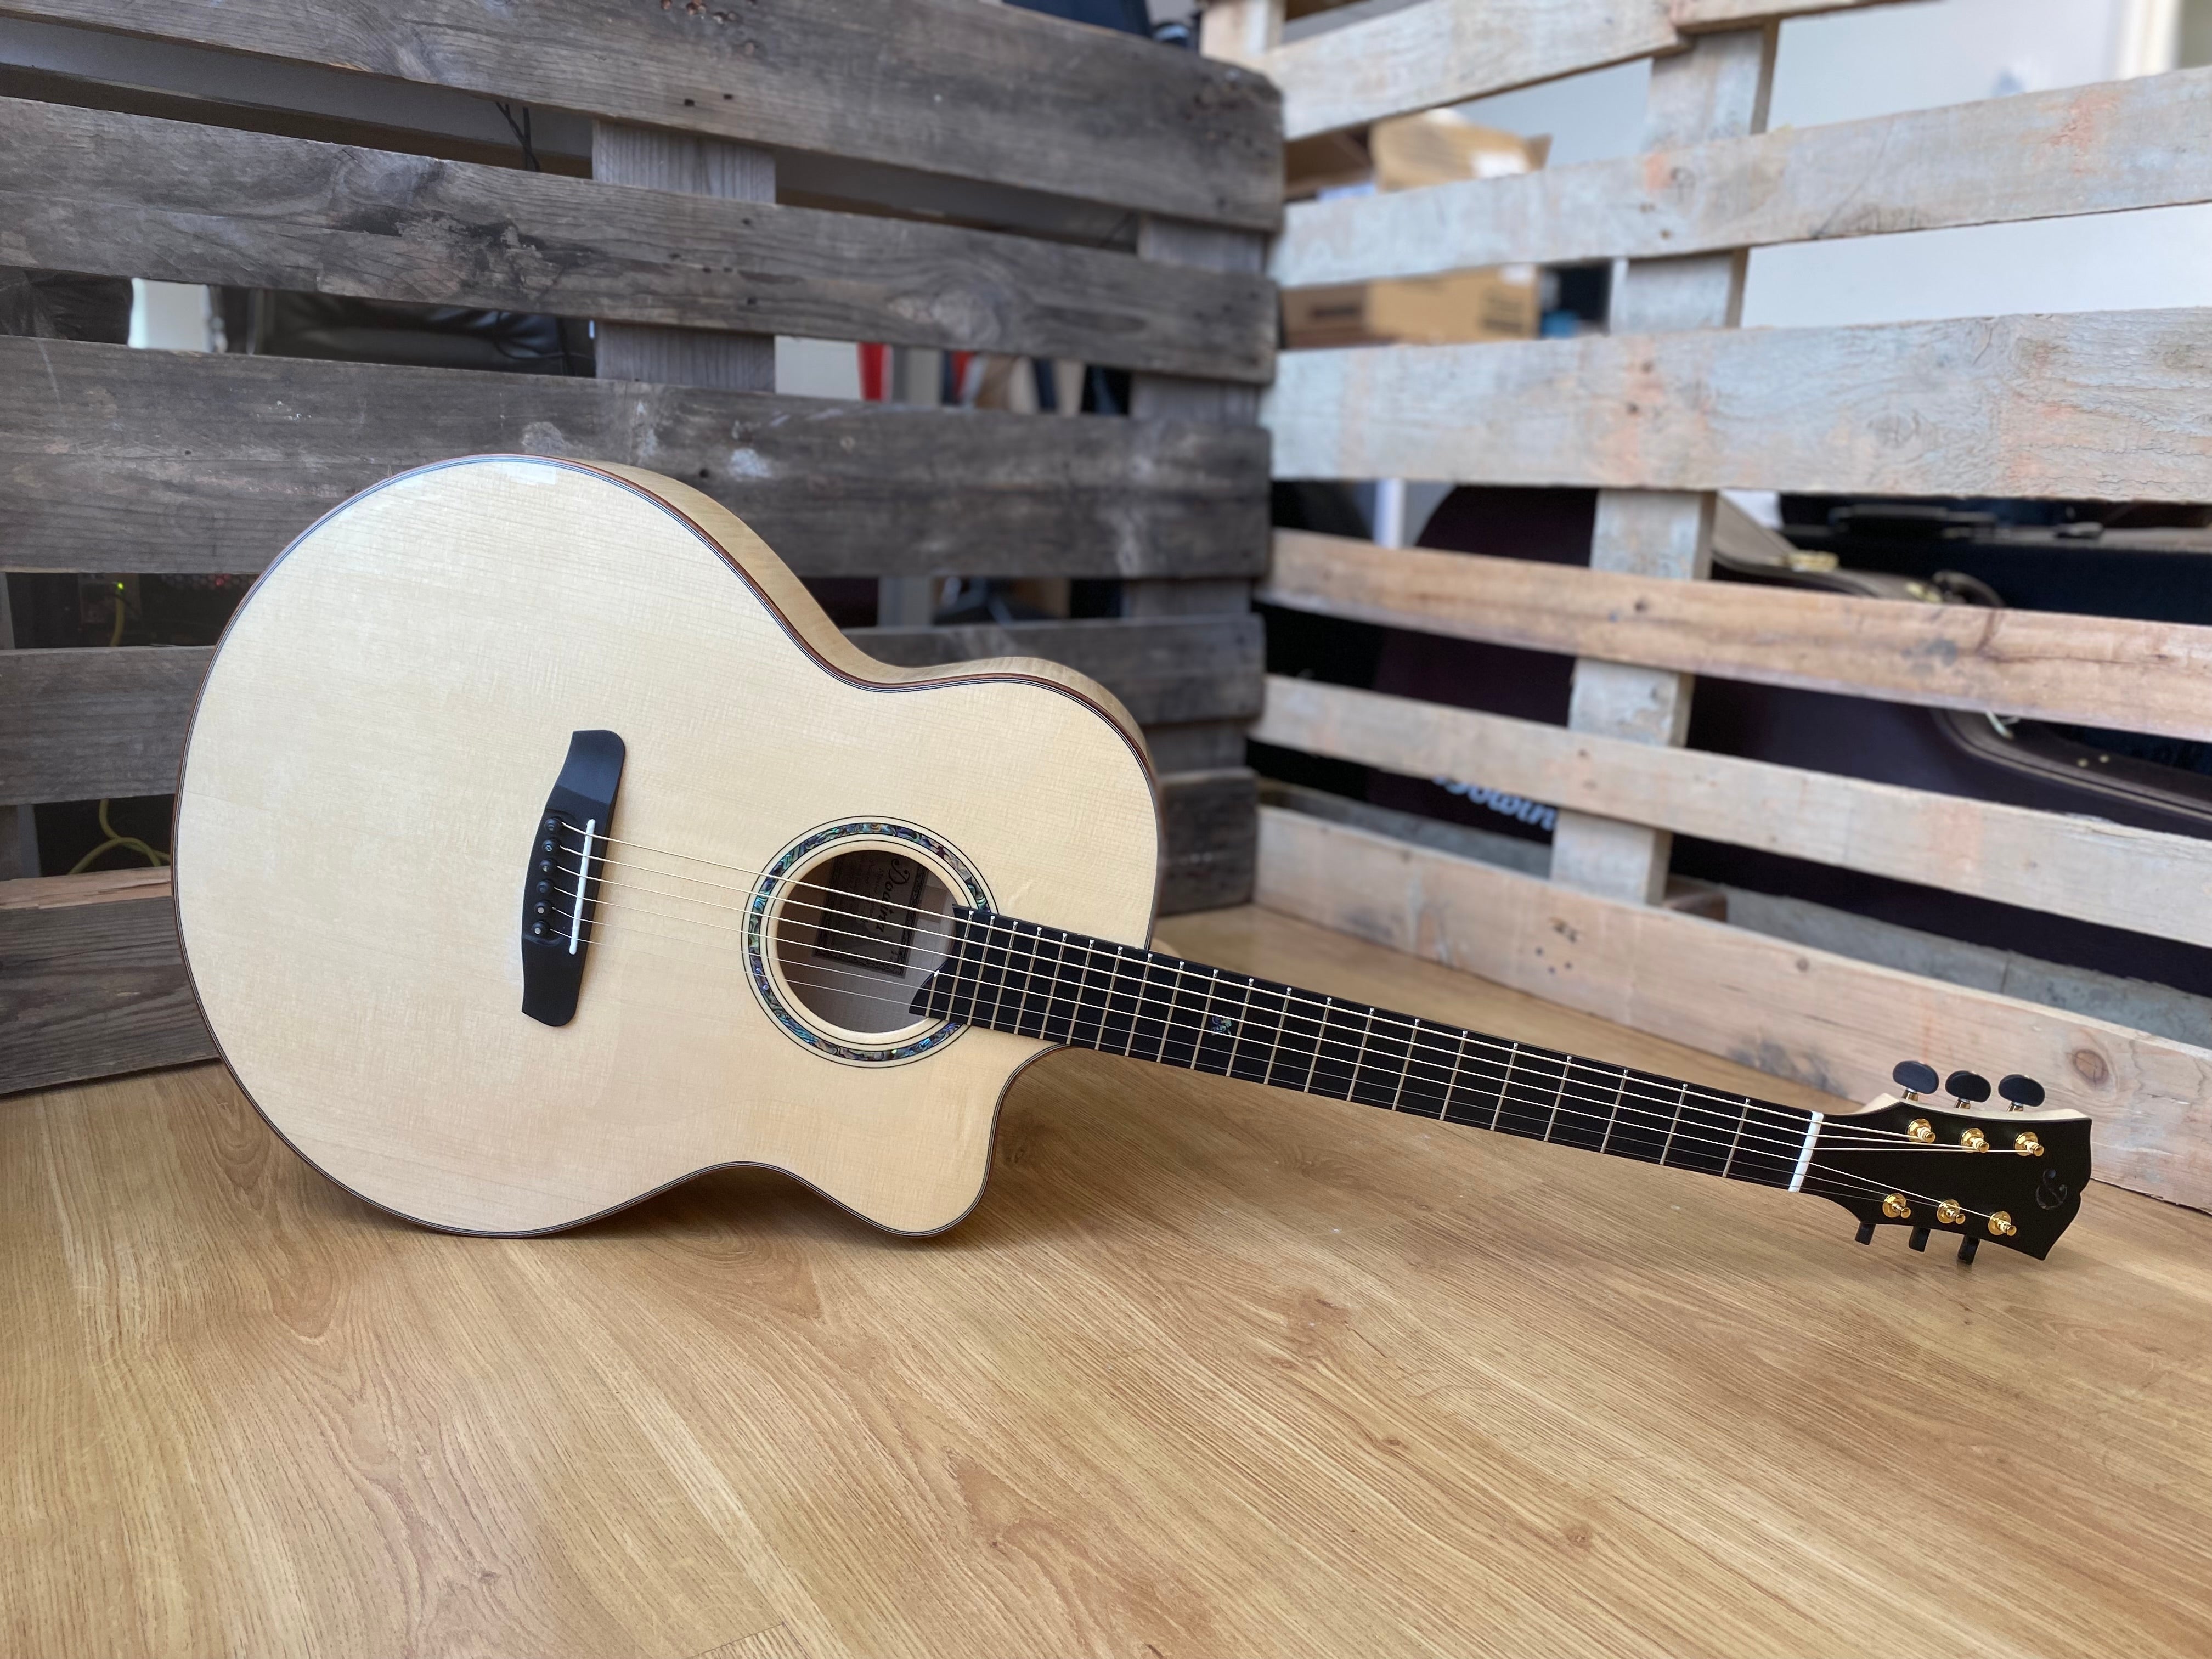 Dowina Master Maple Deluxe JC SWS, Acoustic Guitar for sale at Richards Guitars.